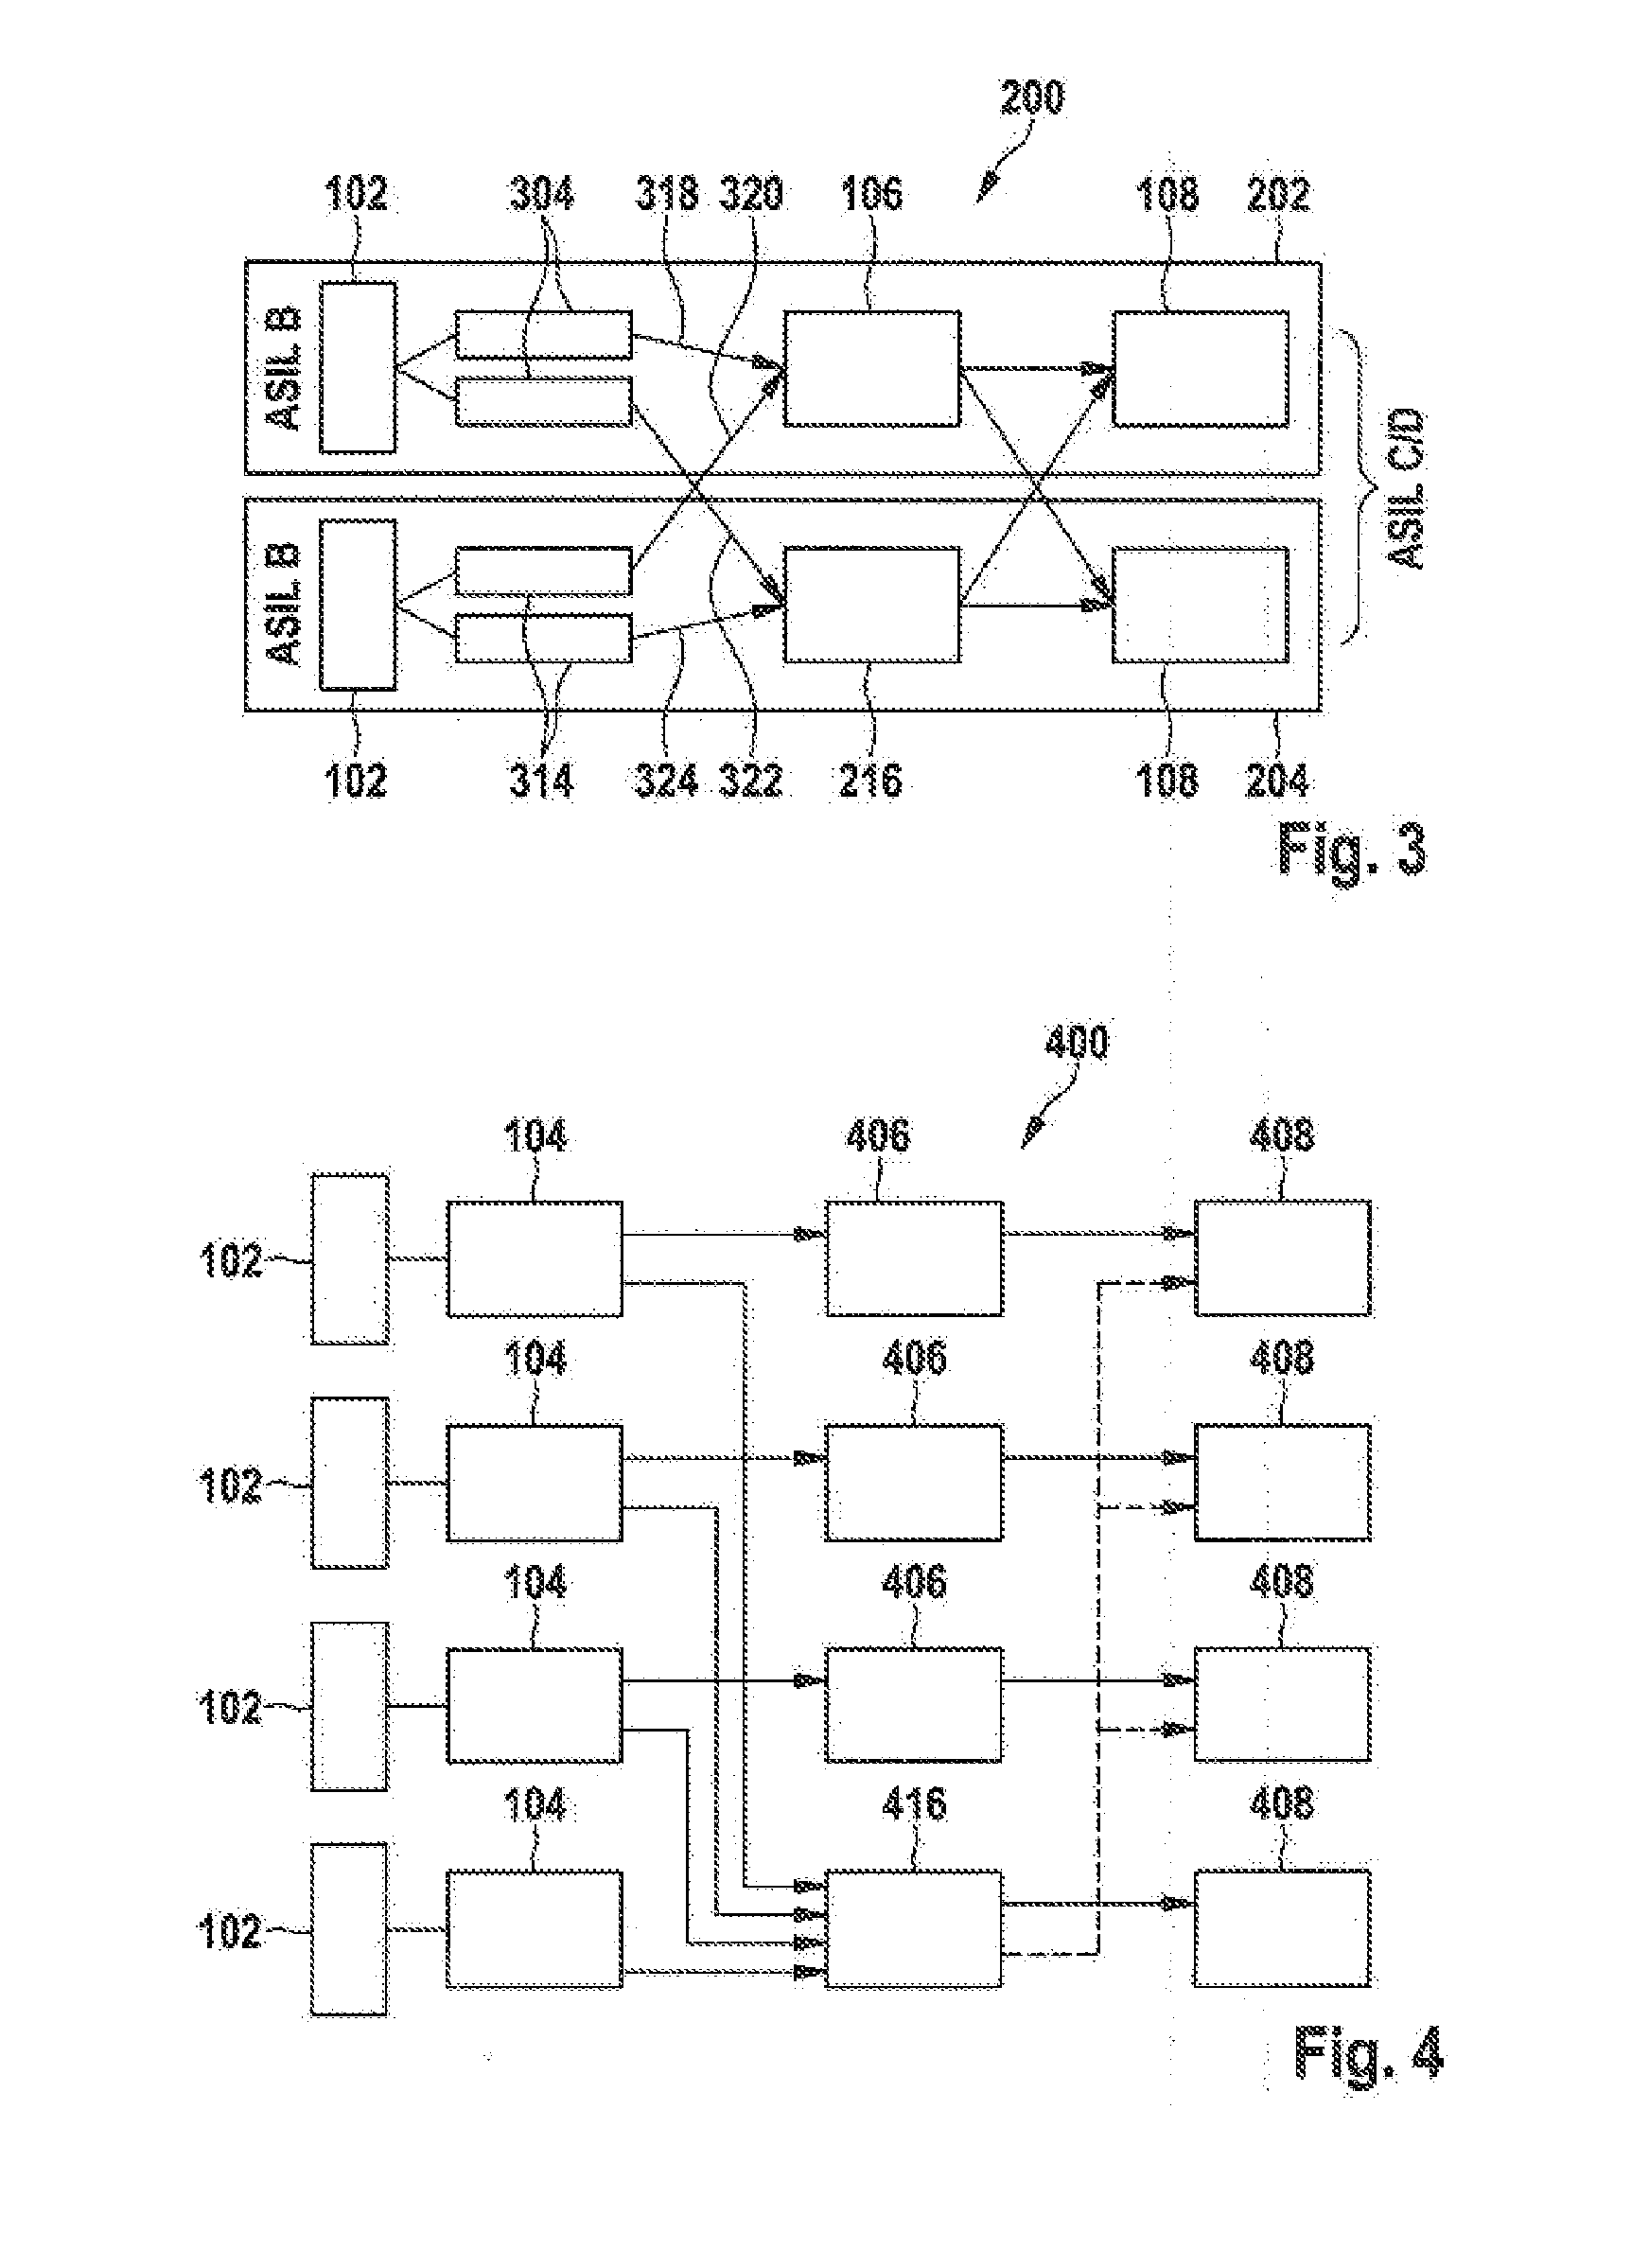 Security architecture, battery and motor vehicle having a corresponding battery